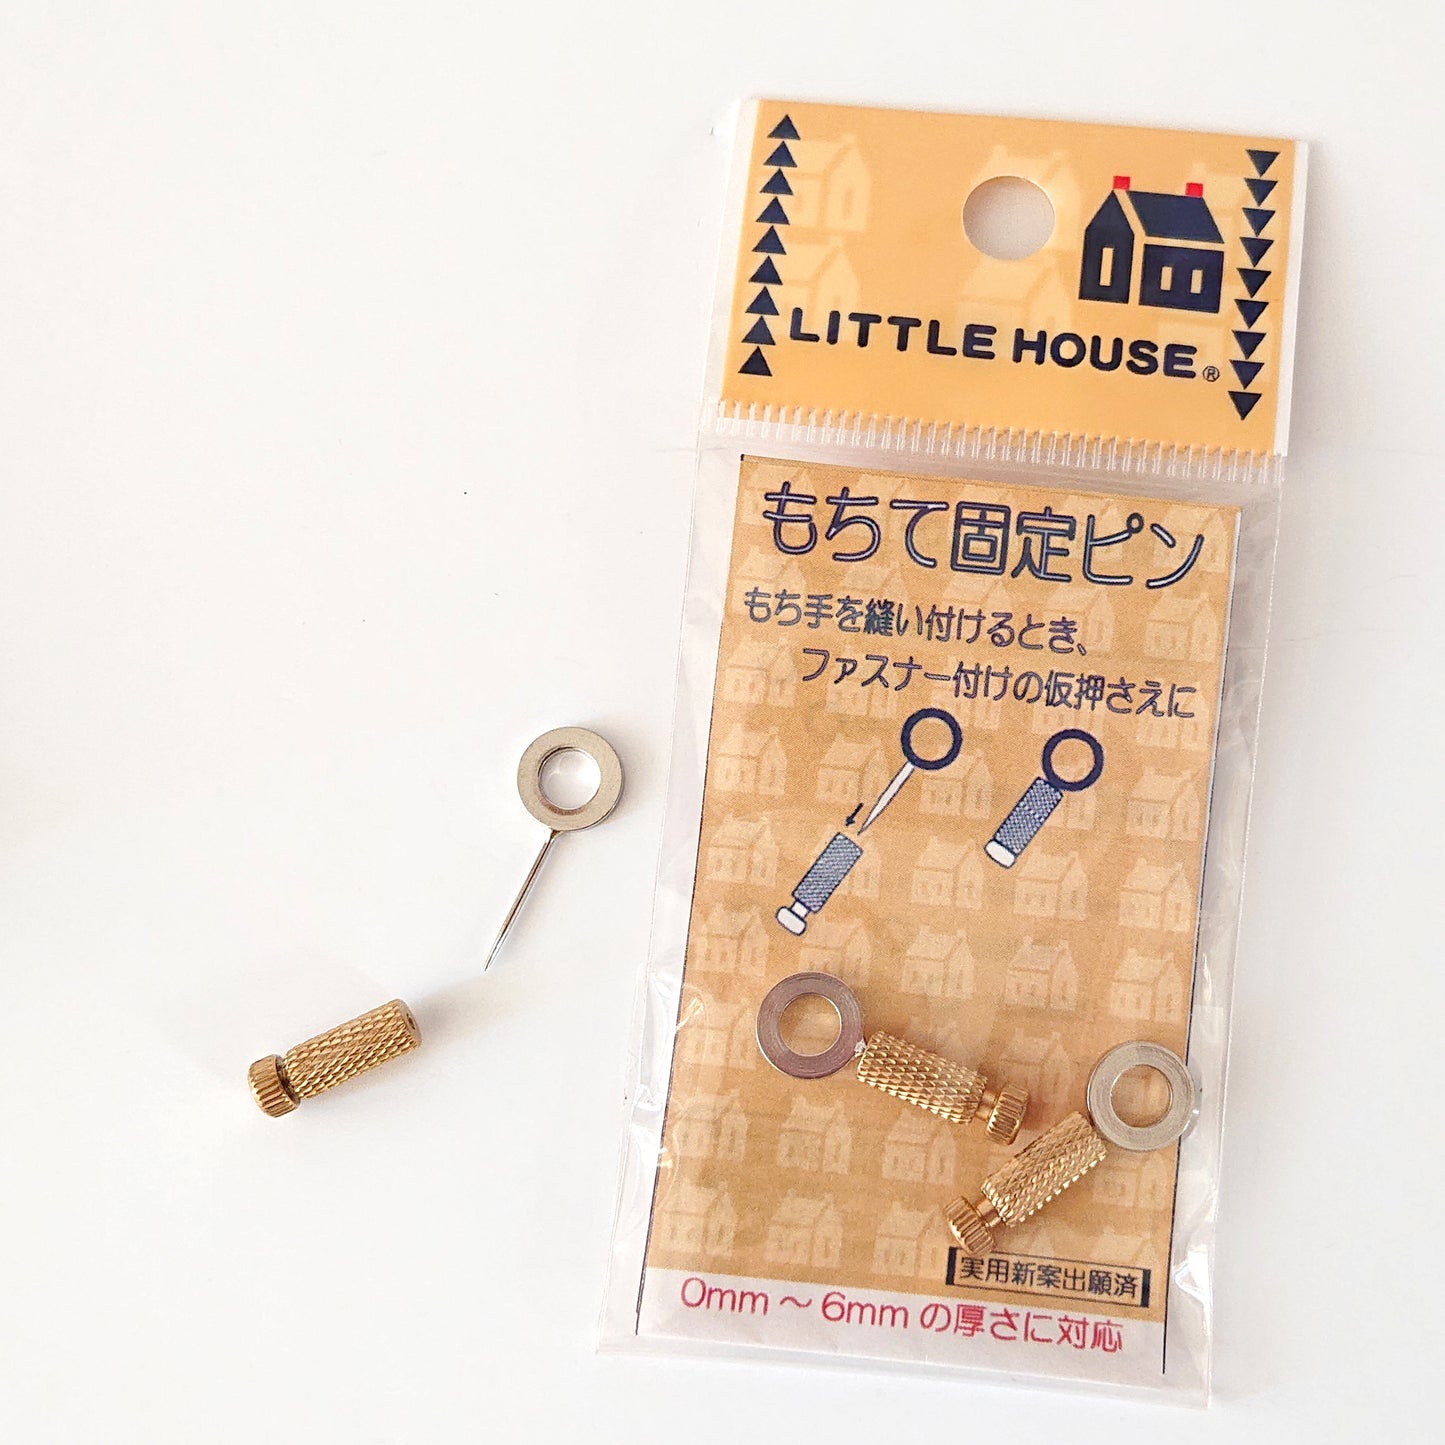 Little House Basting/Installation pins